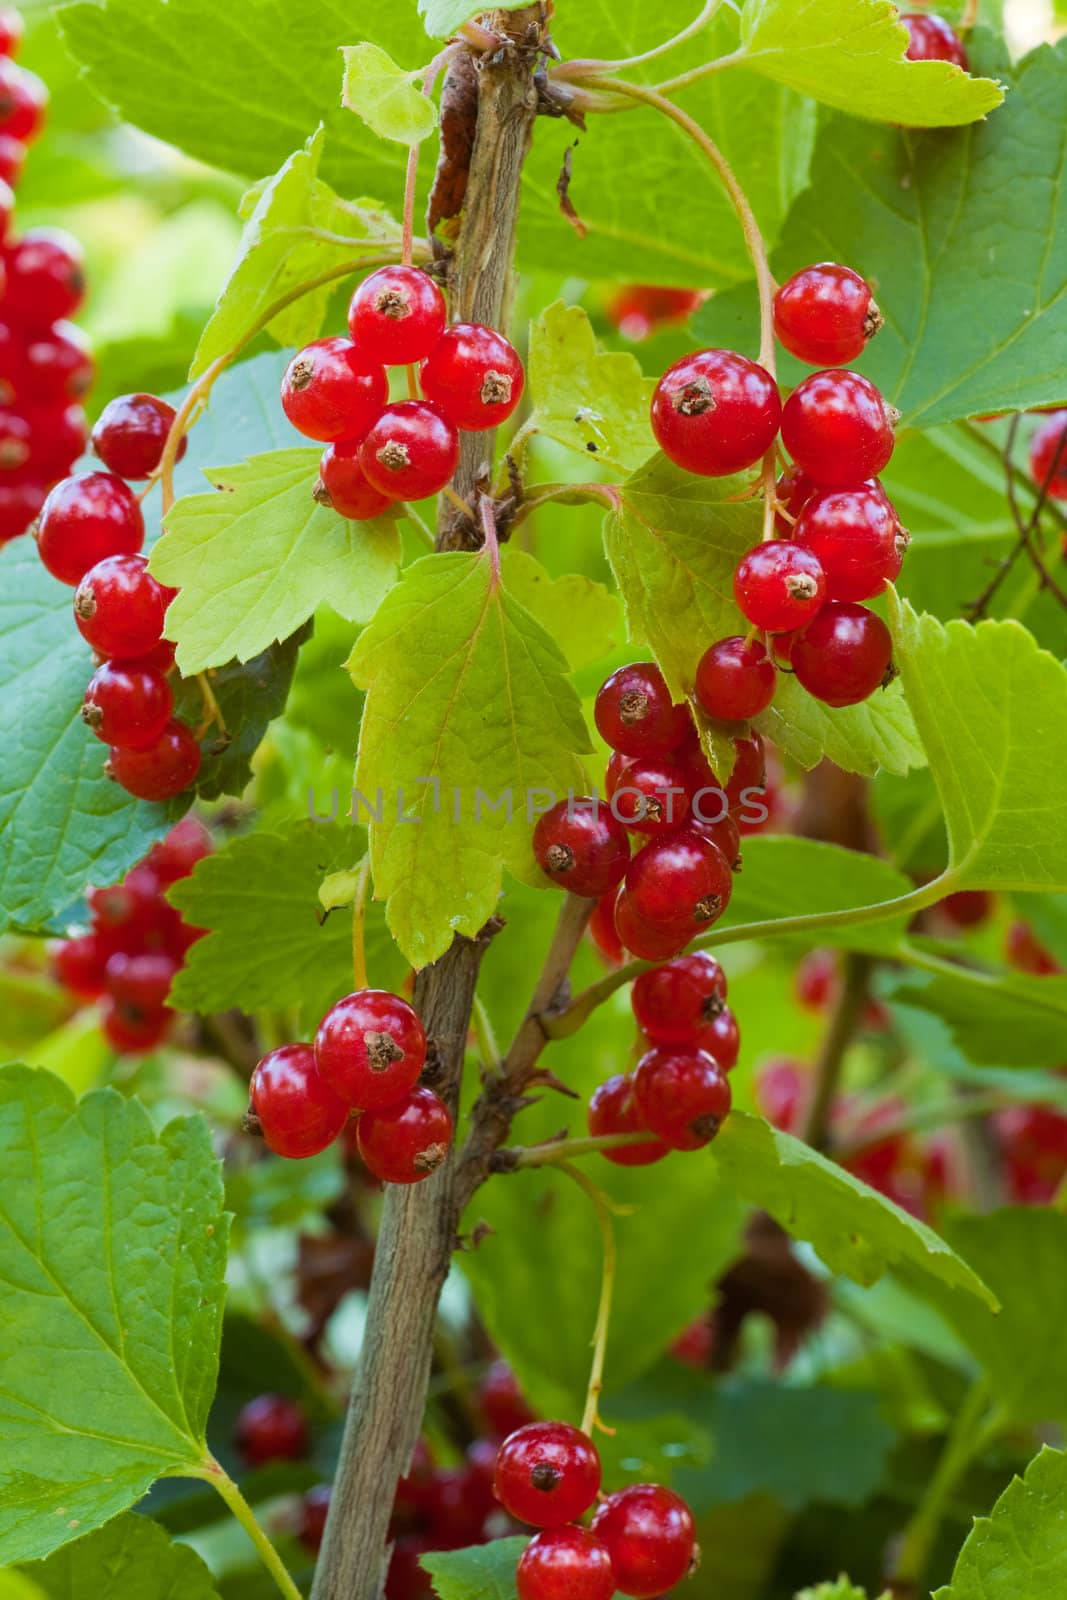 Red currant berries on bush by PiLens